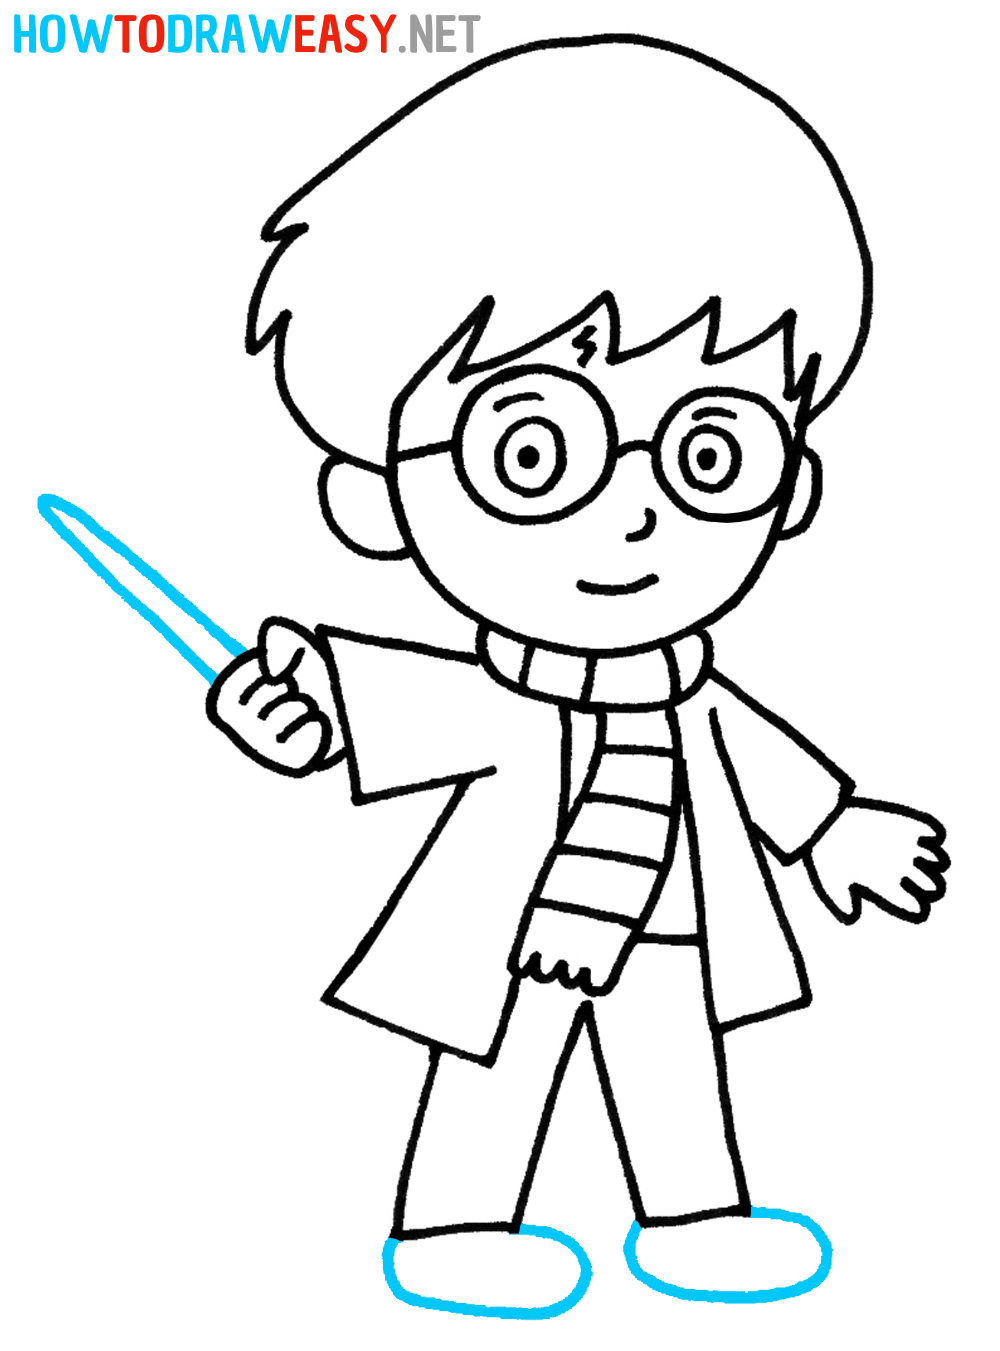 How to Draw an Easy Harry Potter